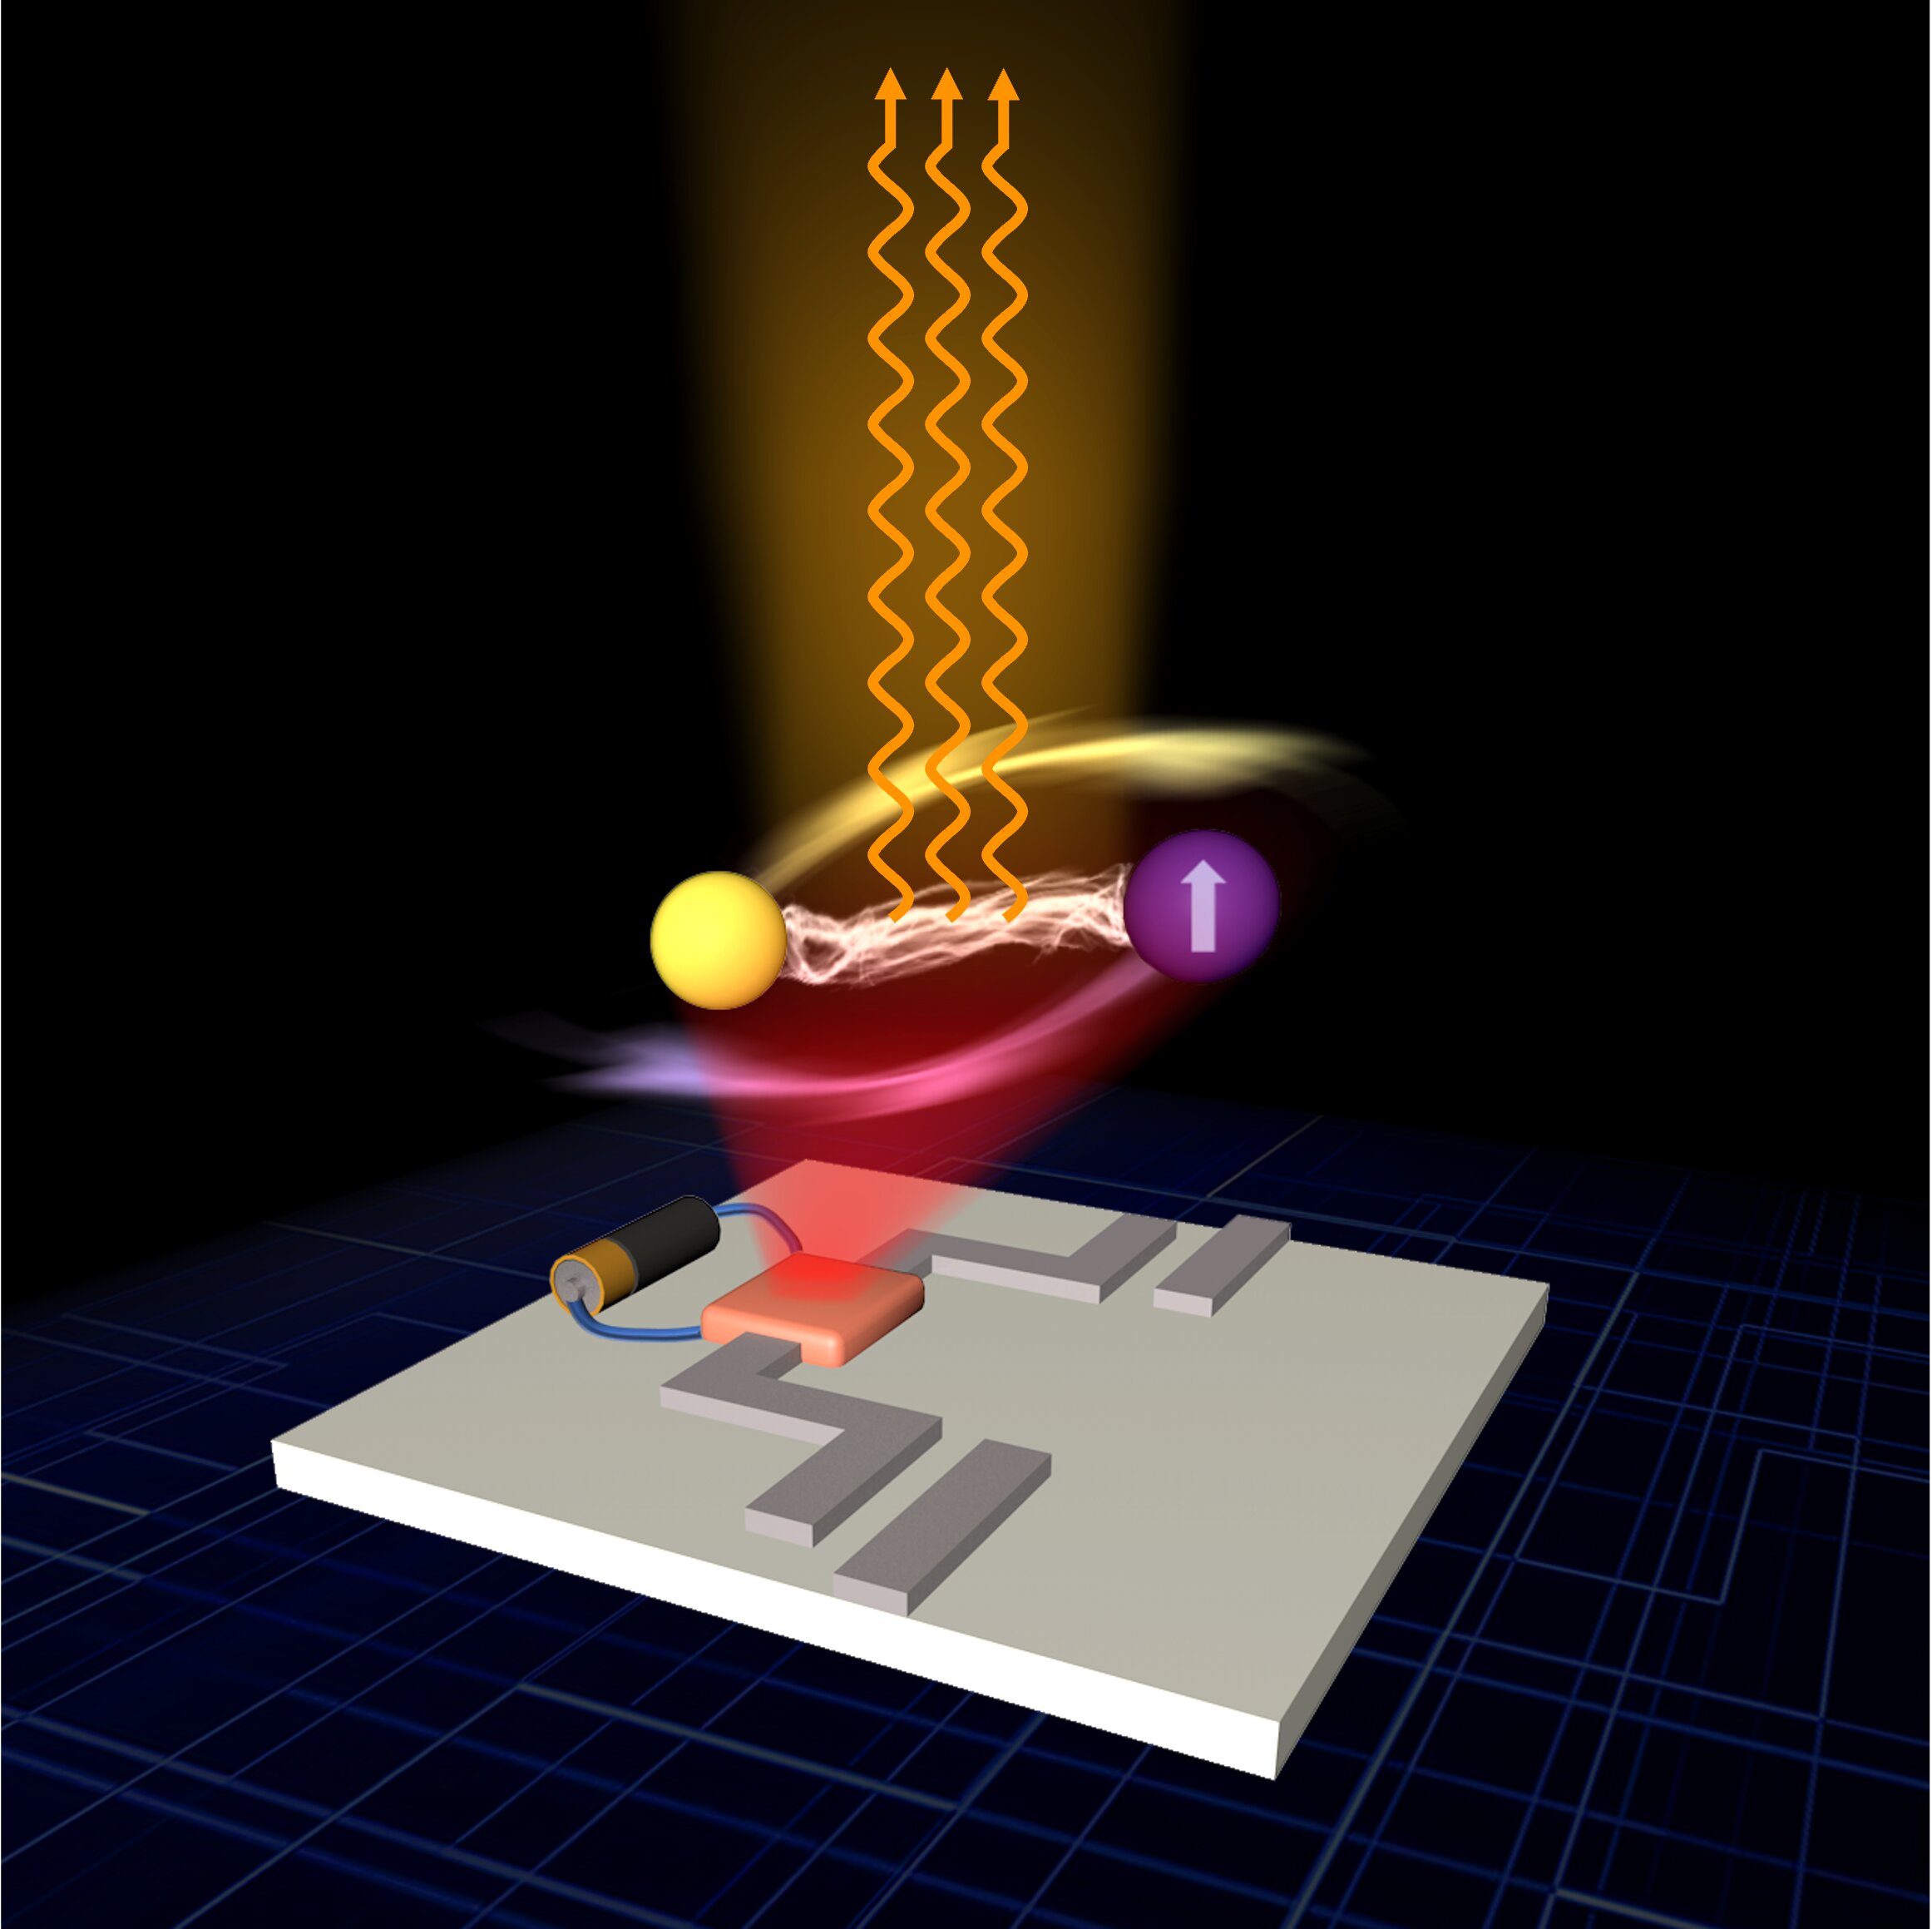 An Efficient Device for Coherent Microwave Emission and Amplification Based on Polaritons